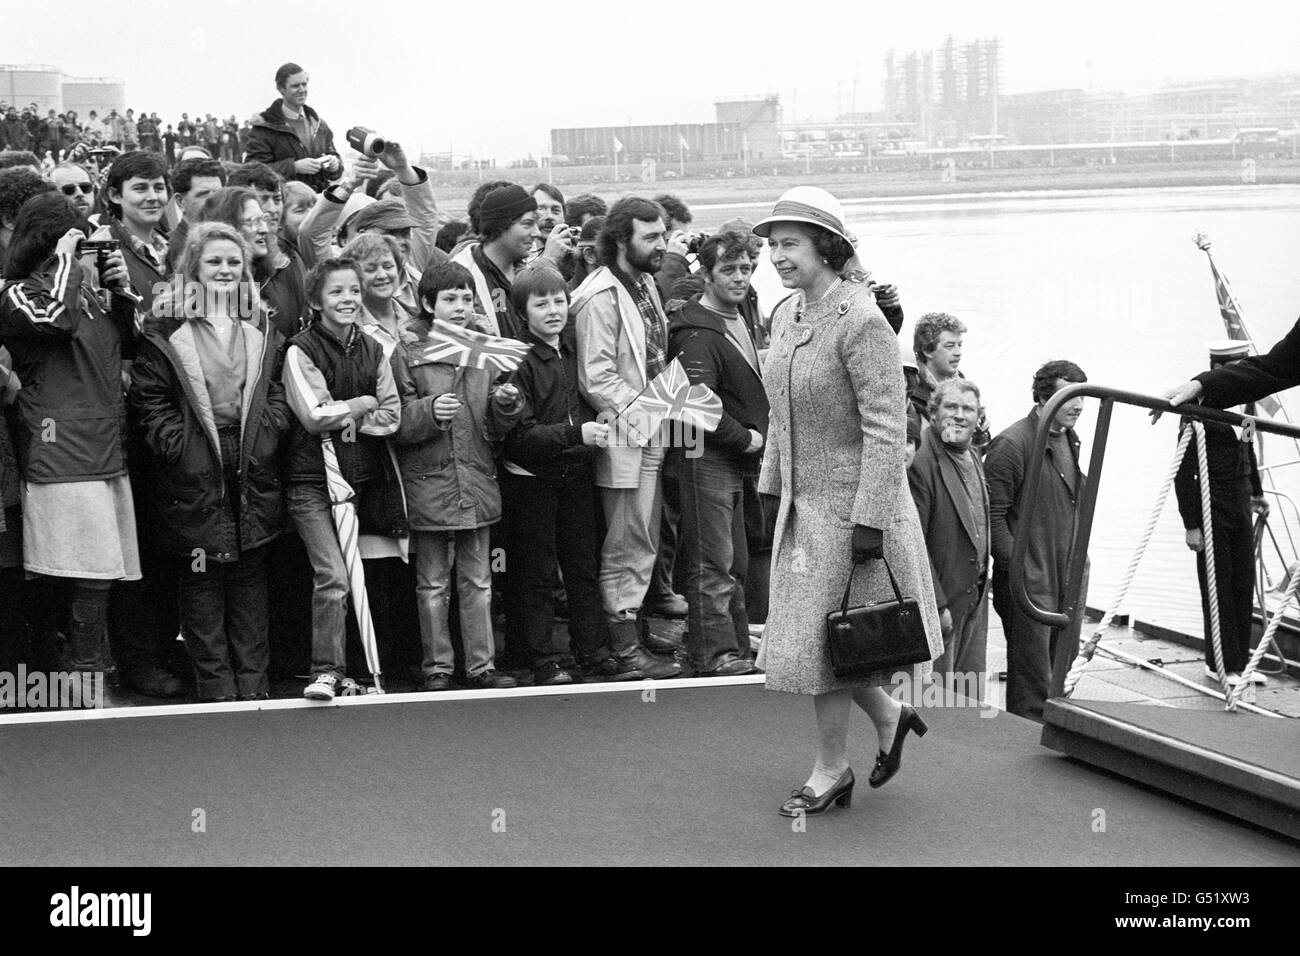 Queen Elizabeth II coming ashore at Sullom Voe, Shetlands Islands, when she visited Europe's biggest oil terminal. Stock Photo